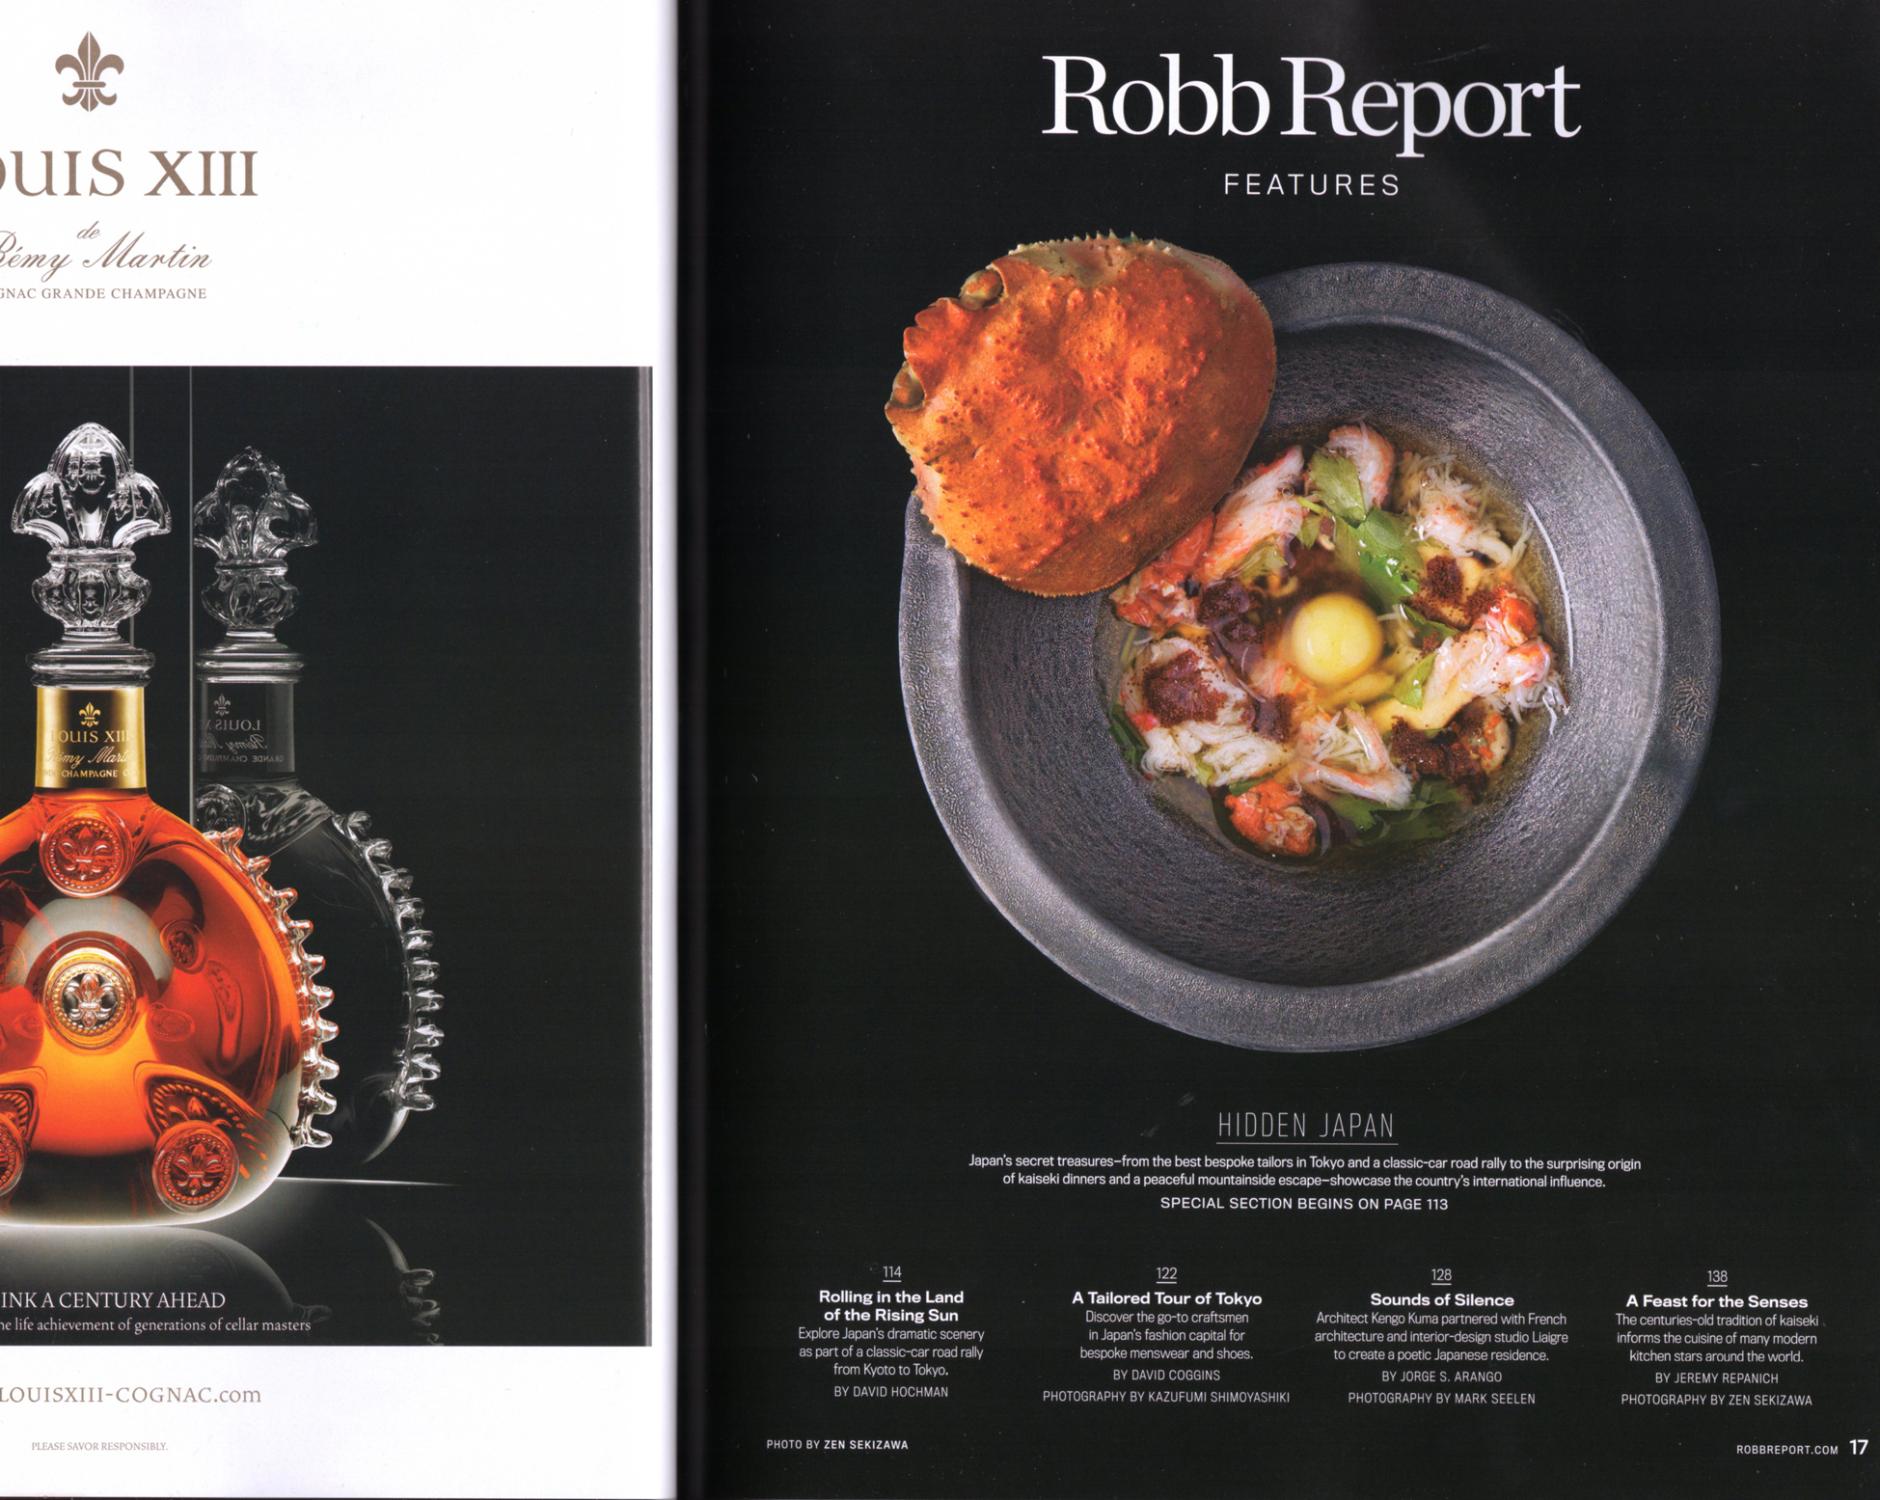 What He Wore – Robb Report